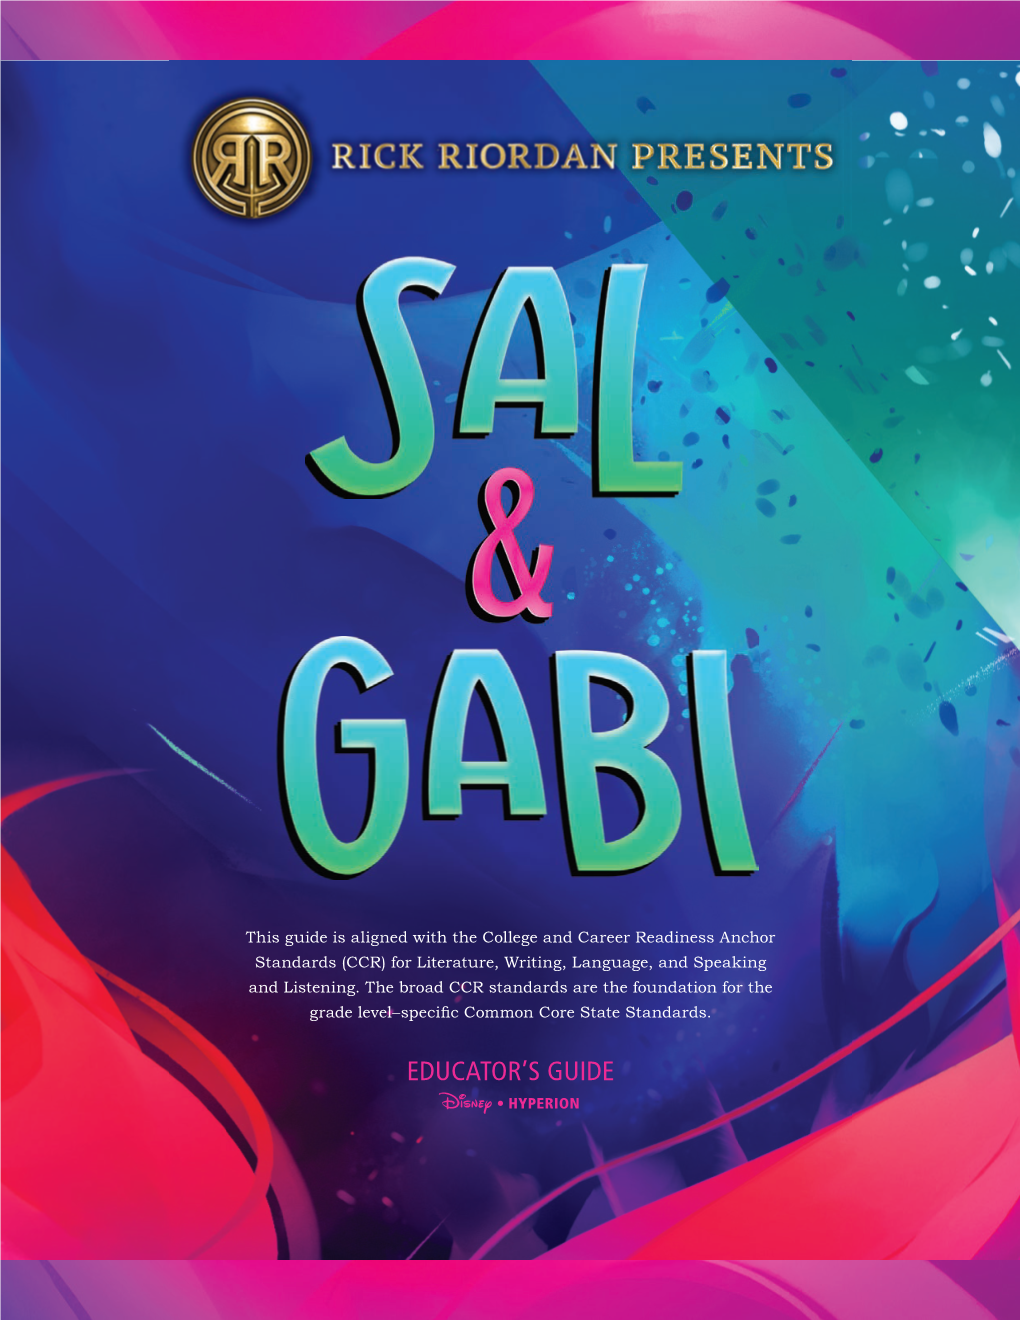 Educator's Guide for the Sal and Gabi Series